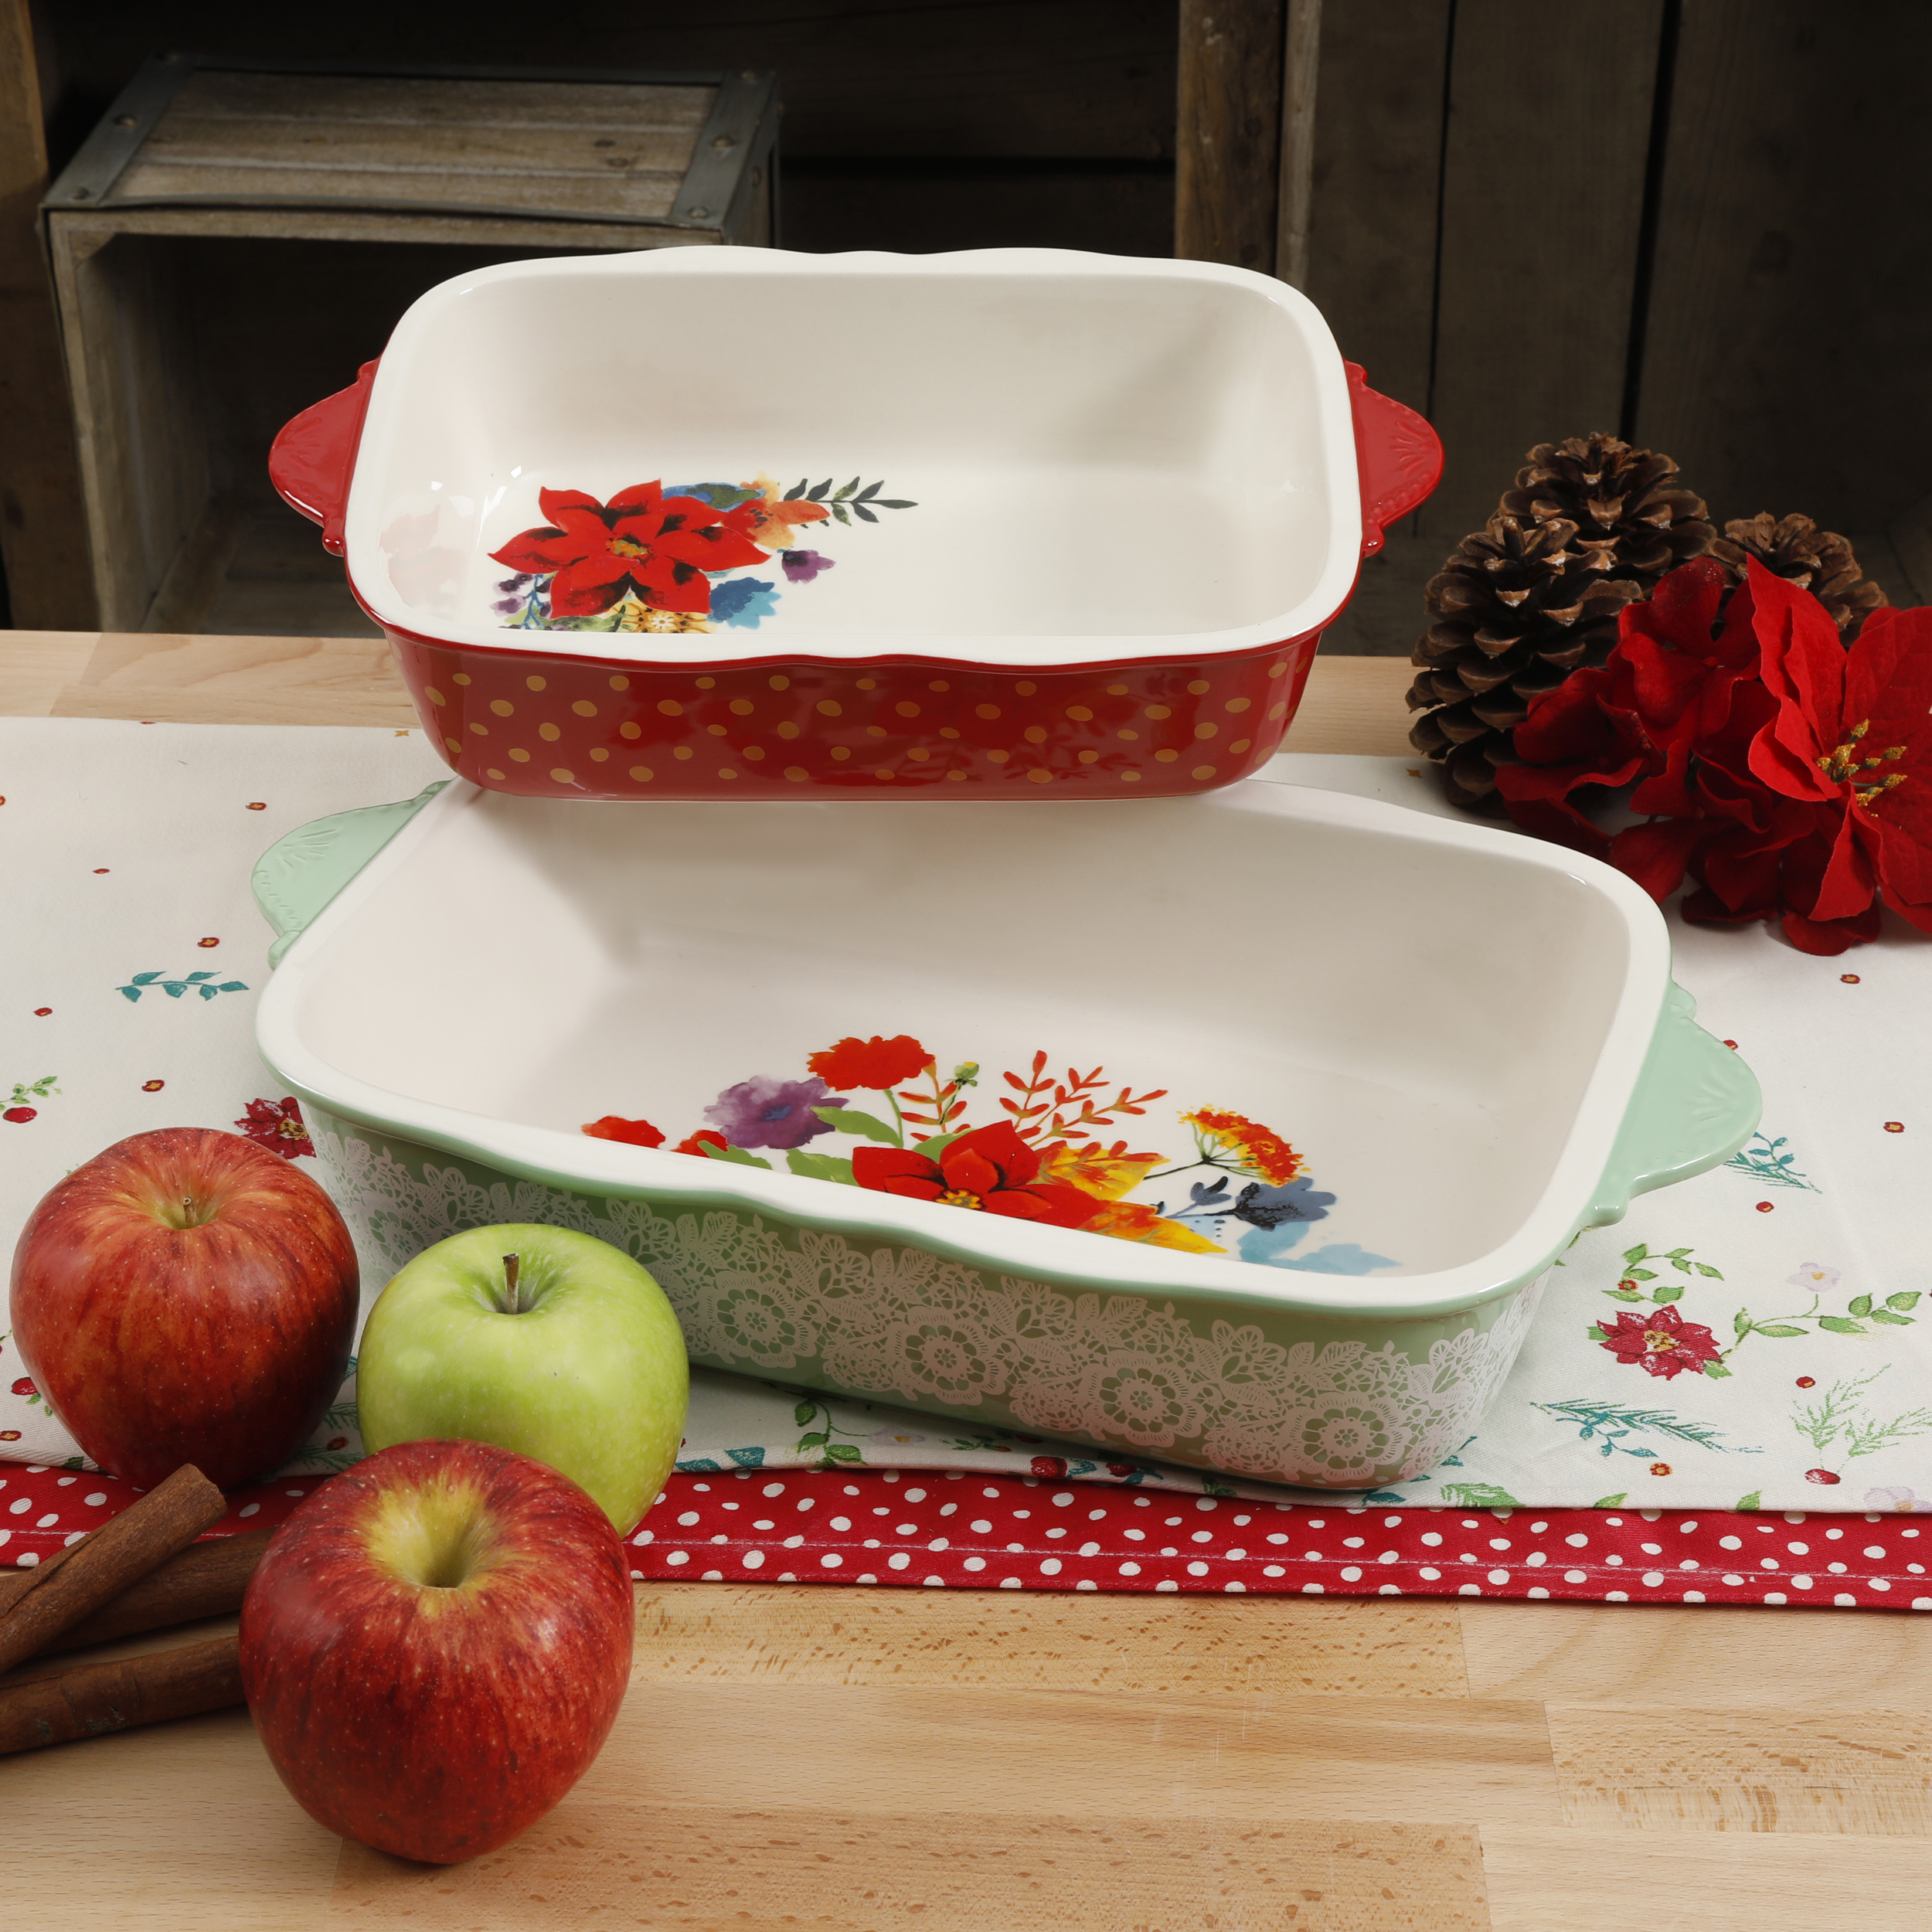 The Pioneer Woman Frost 2-Piece Bakeware Set - image 1 of 7